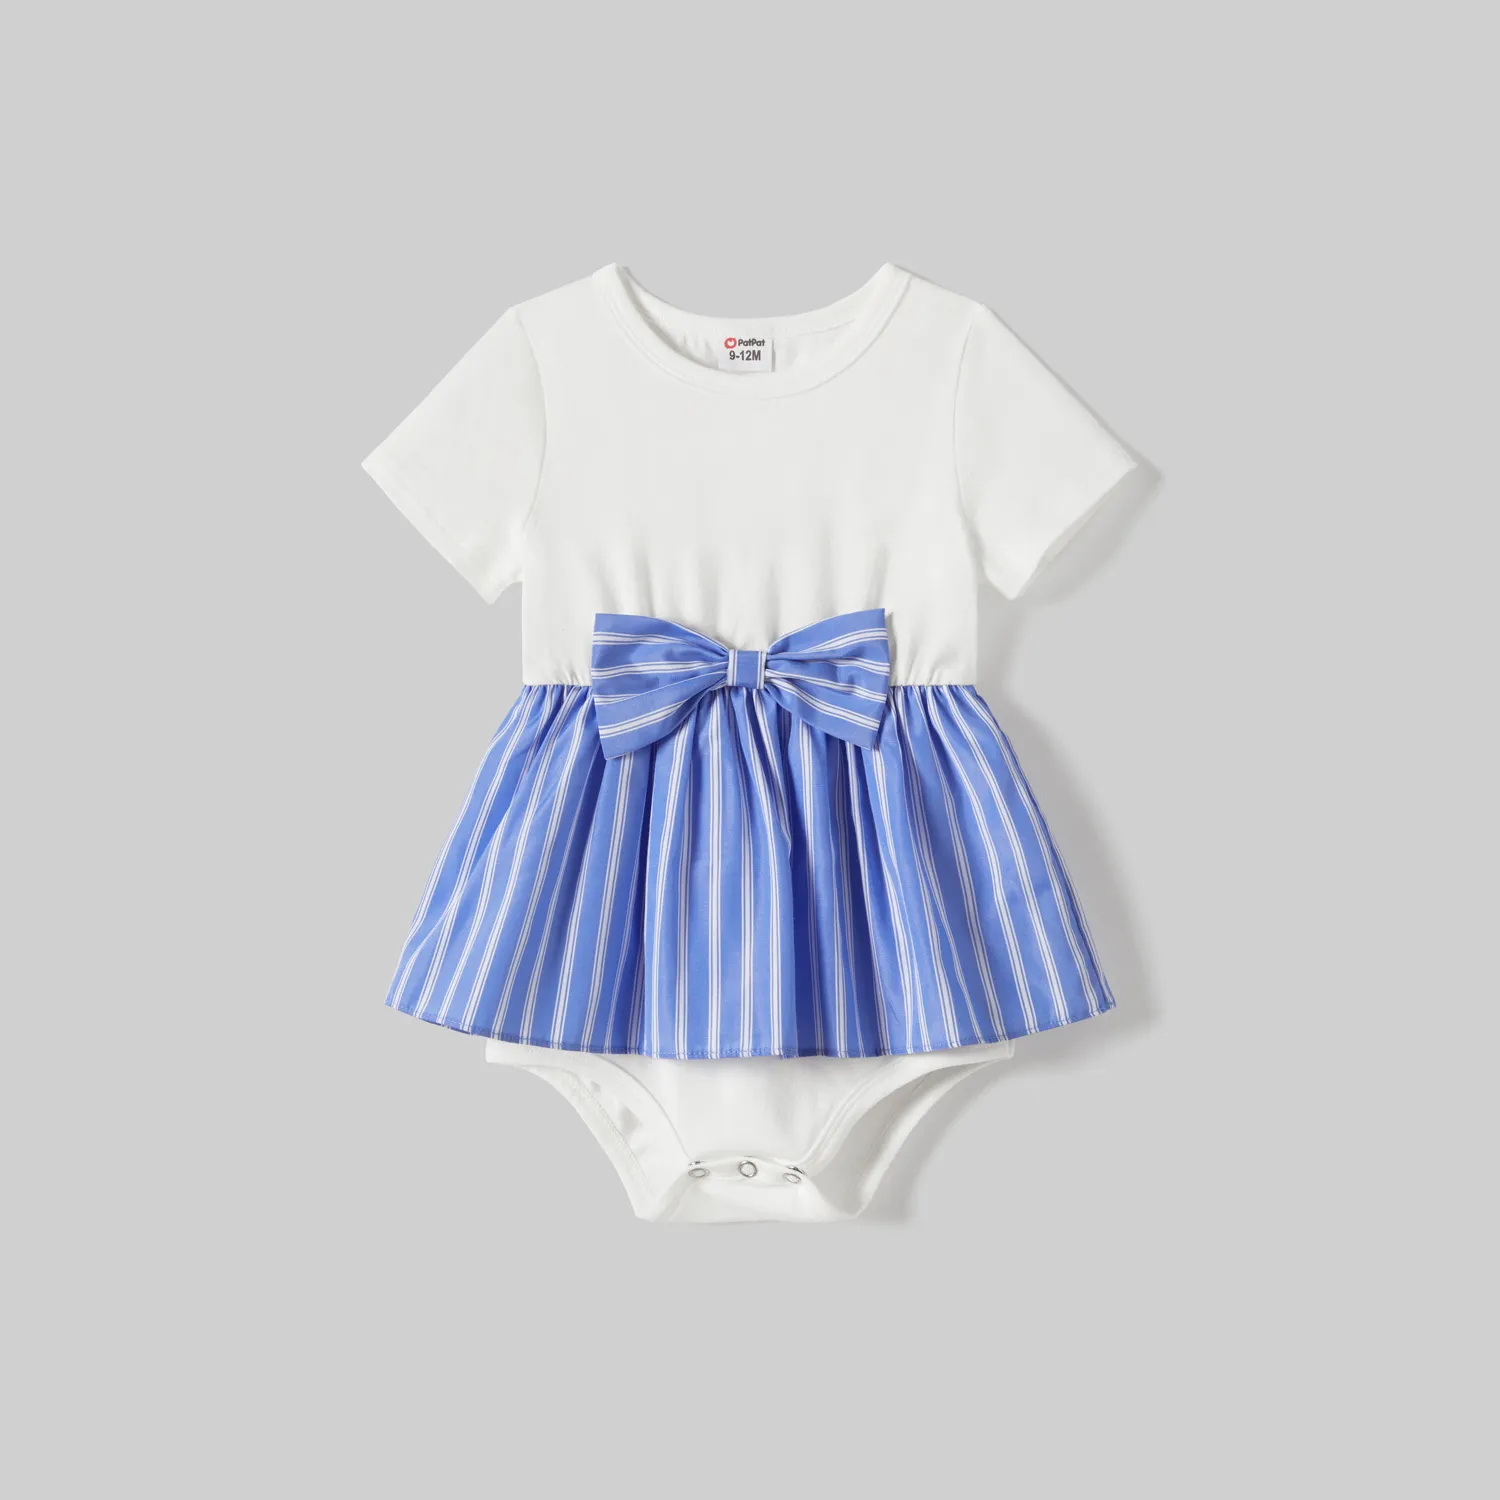 Family Matching Striped Button Belted High Low Hem Dresses and Striped Short Sleeve Tops Sets